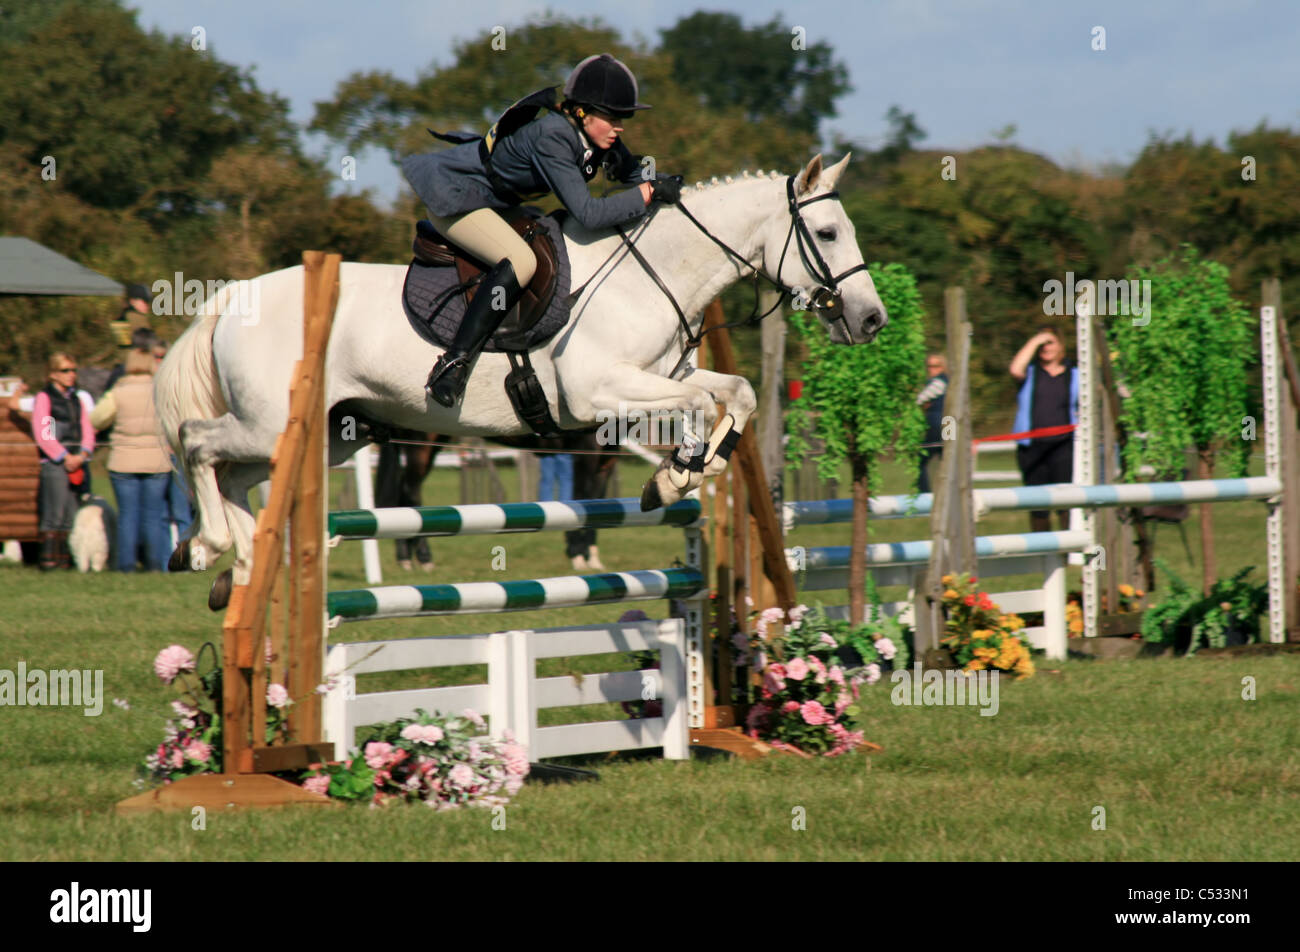 Young lady show jumping Somerford Park at eventing two day horse trial Cheshire England September 2009 Stock Photo